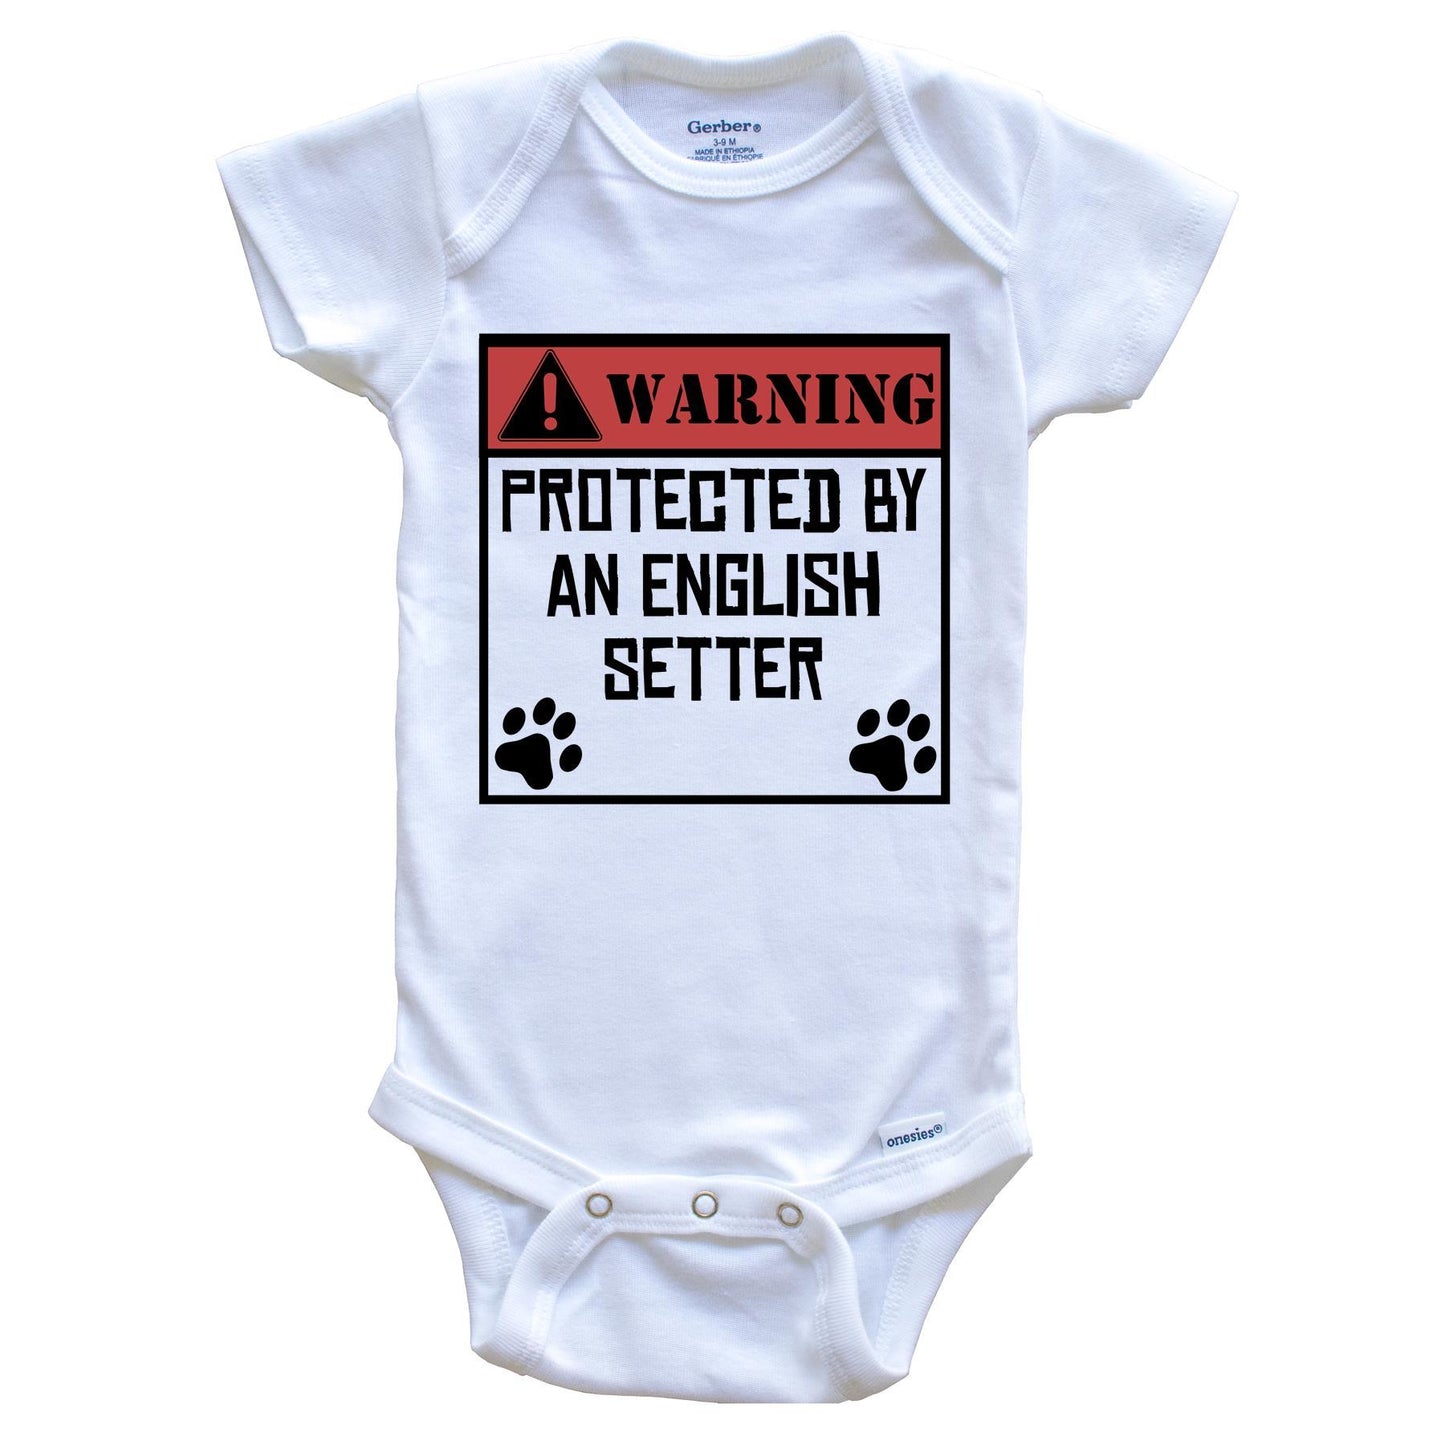 Warning Protected By An English Setter Funny Baby Onesie